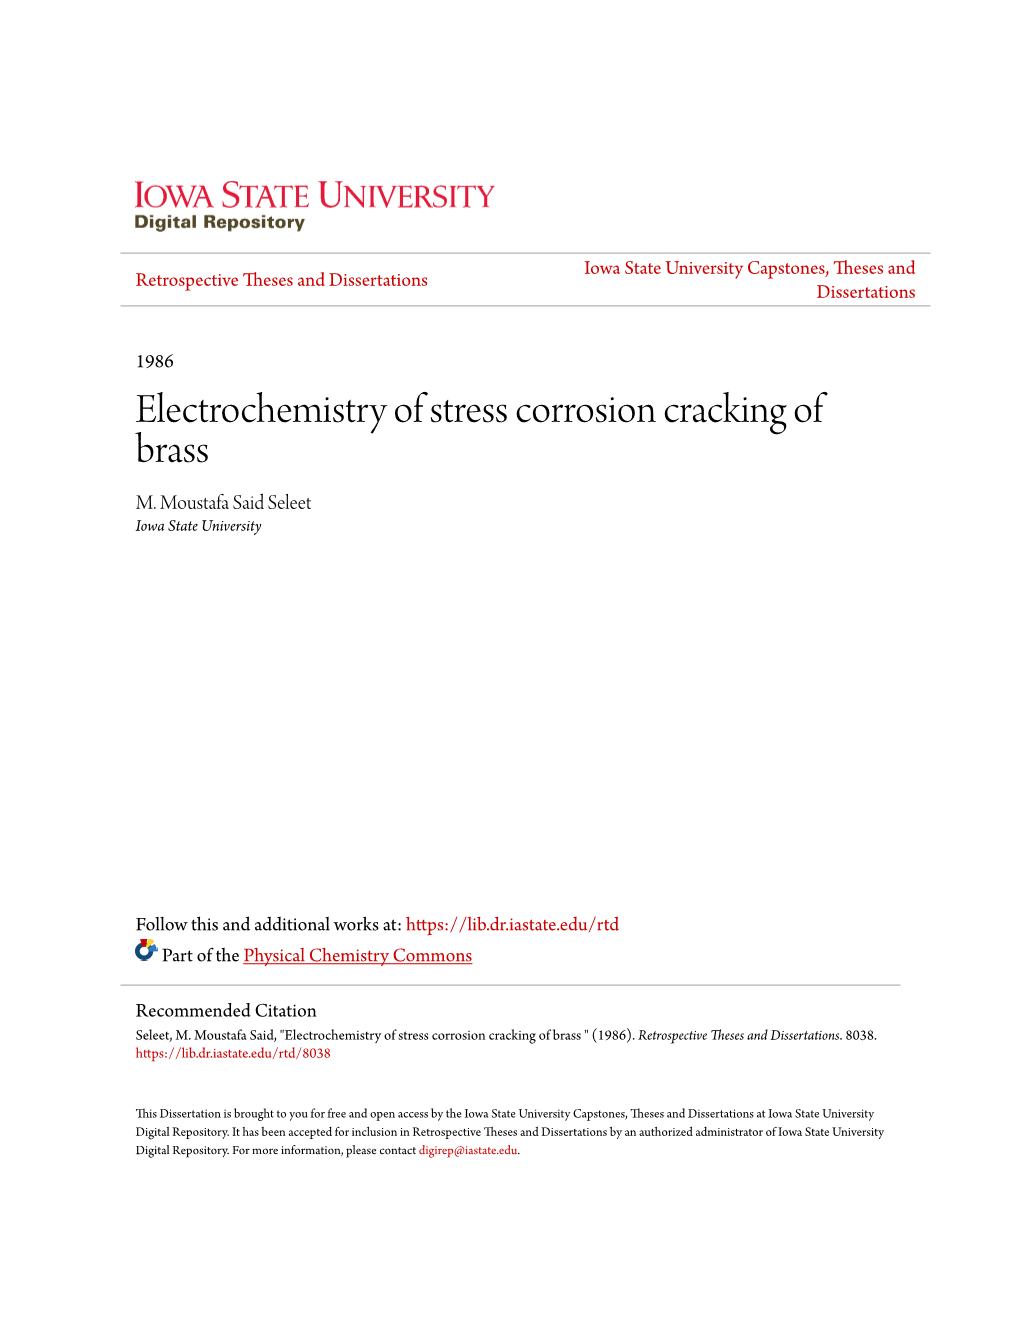 Electrochemistry of Stress Corrosion Cracking of Brass M